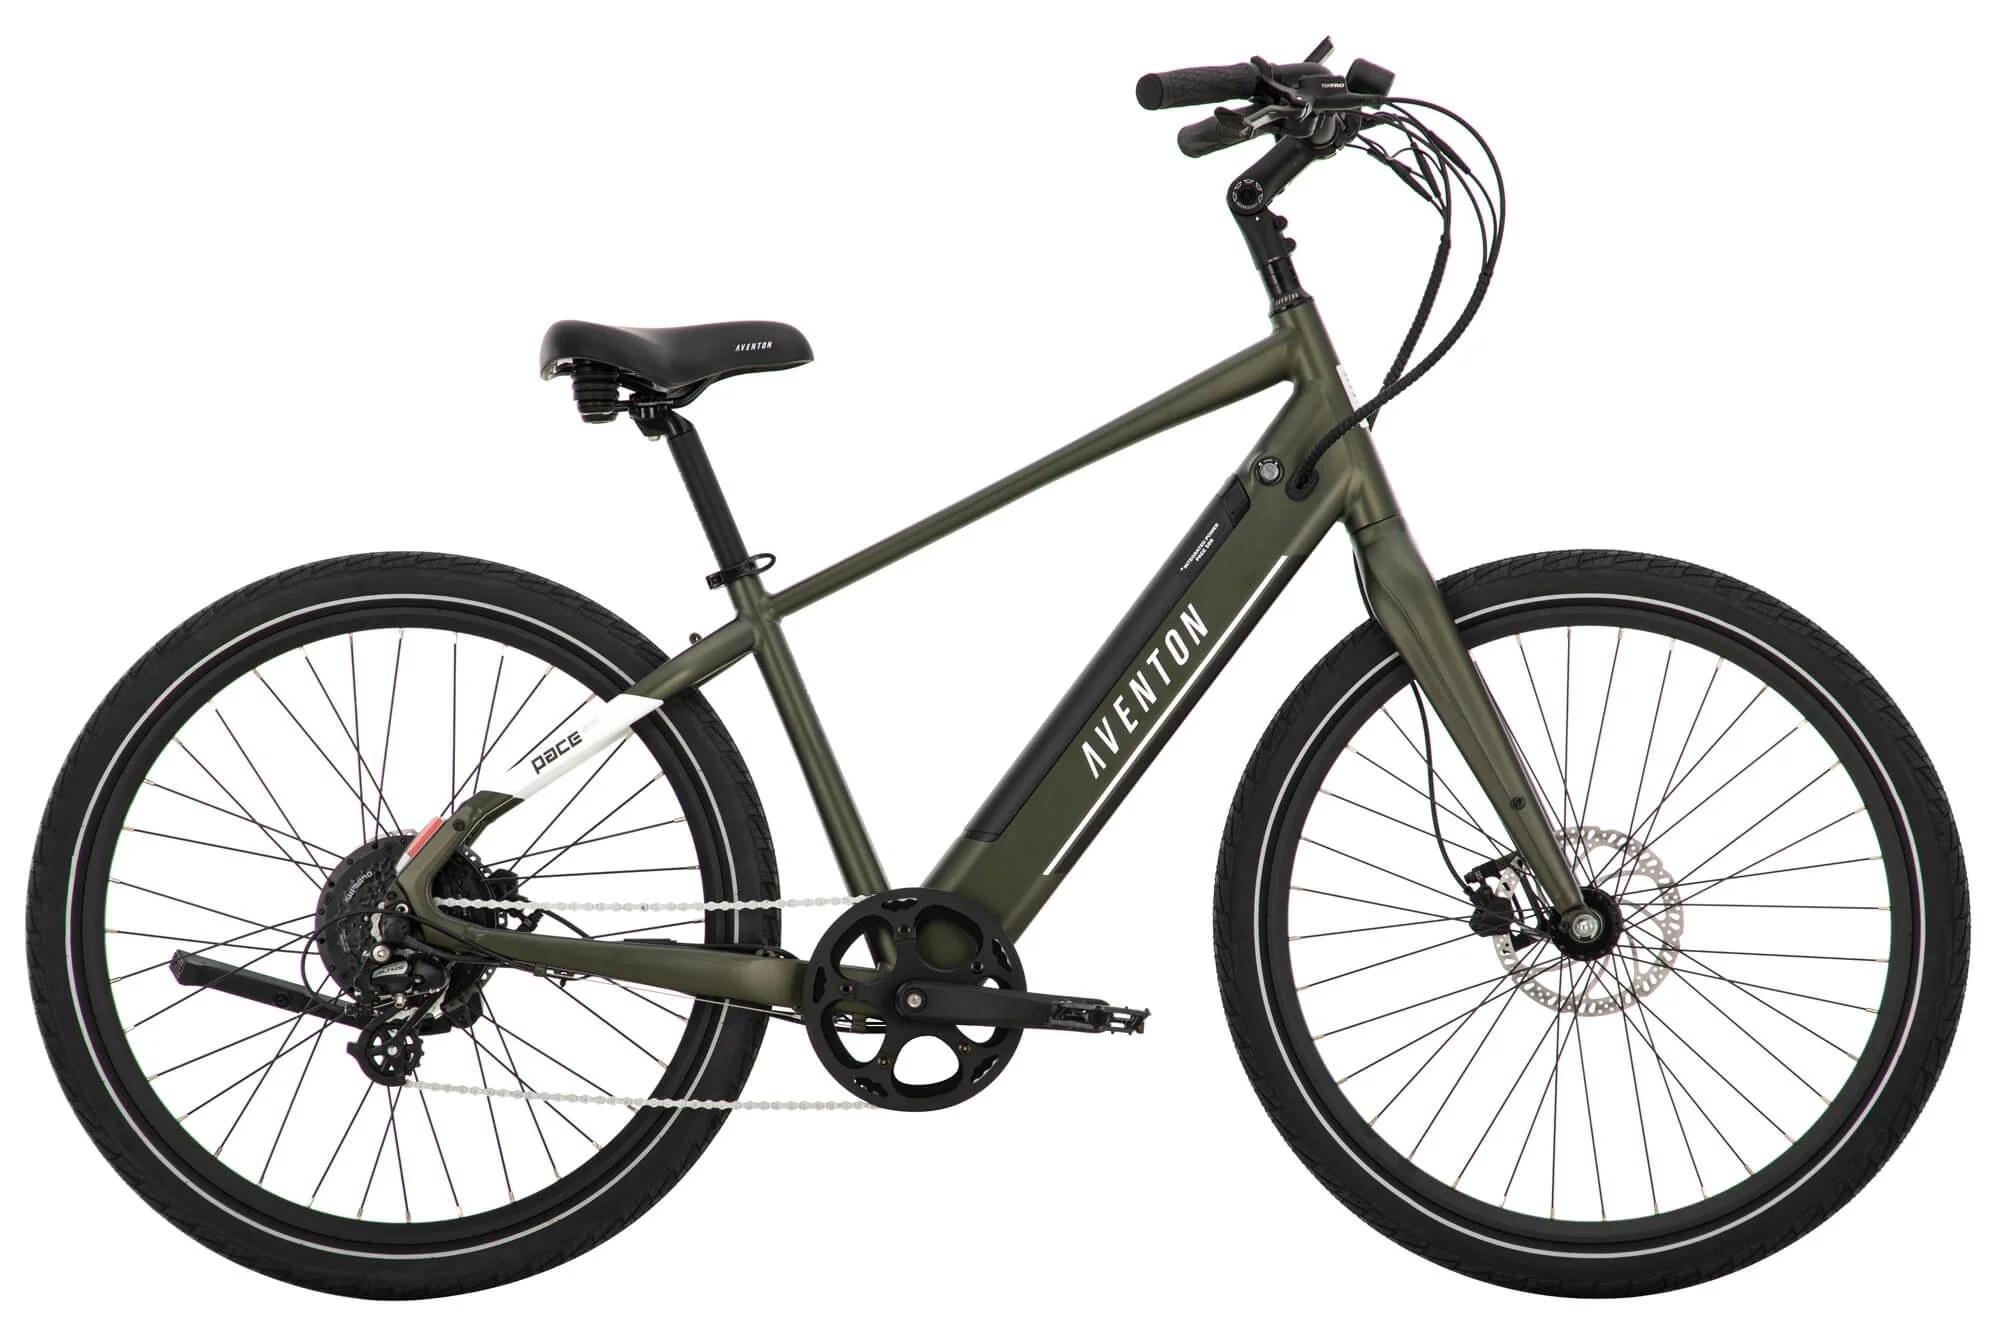 The Best Ebike for Long Distance